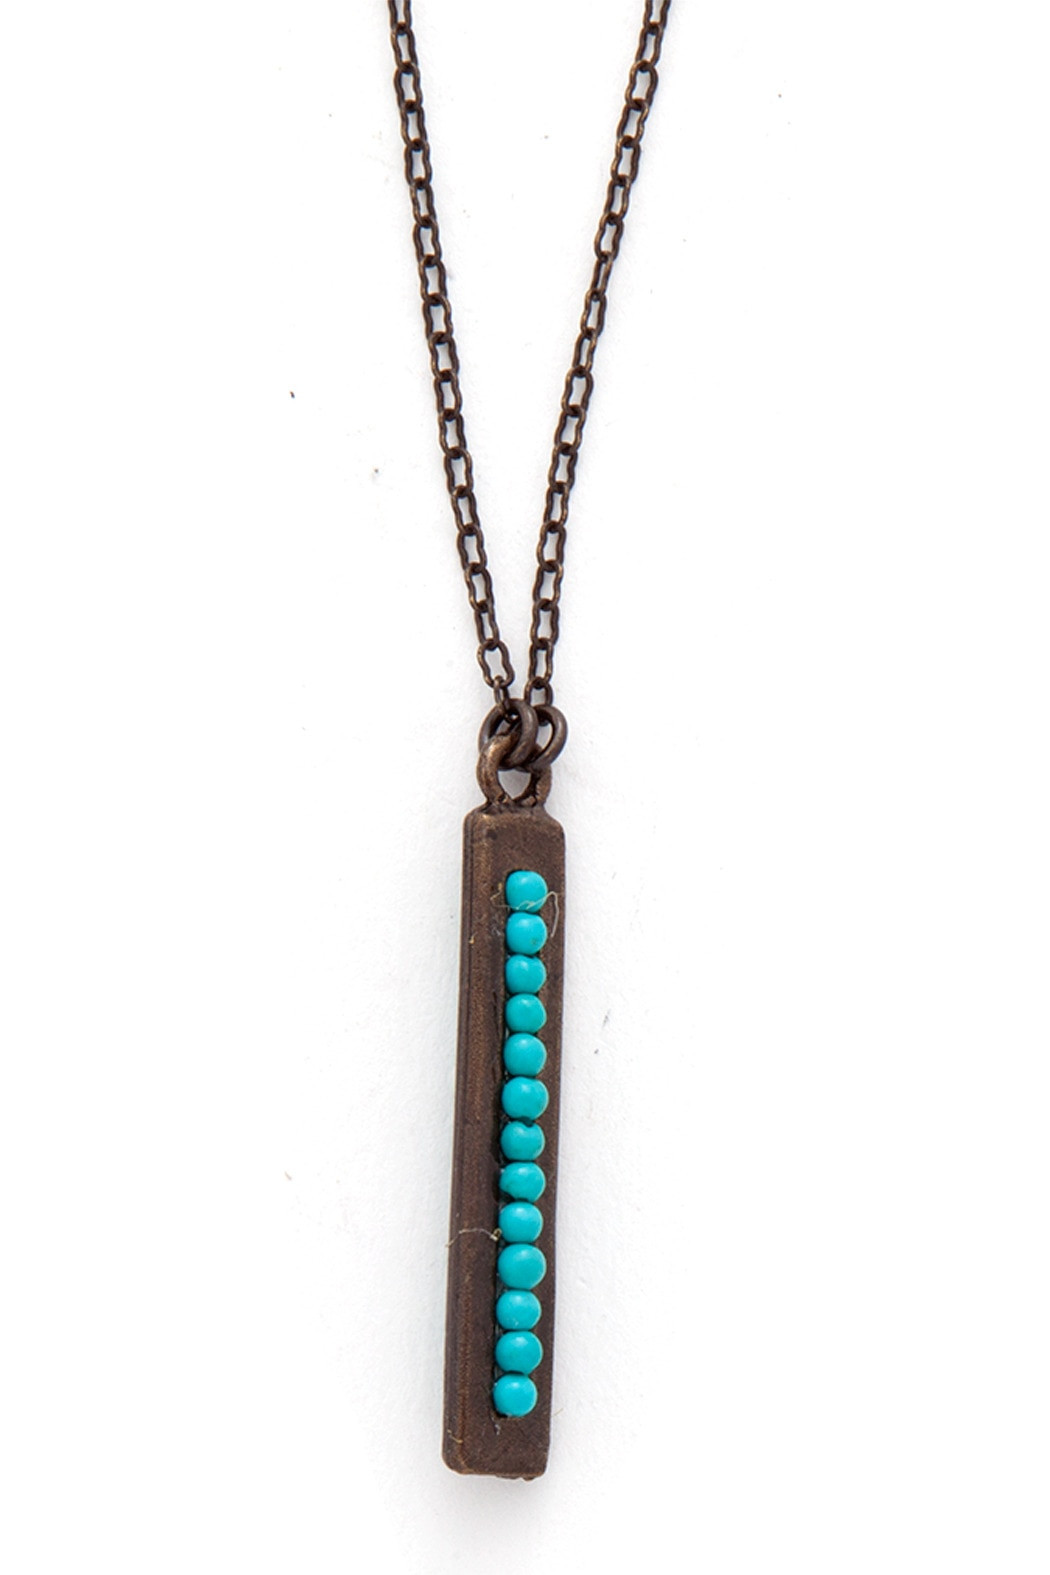 Turquoise Bar Necklace
 Rebel Designs Turquoise Bar Necklace from California by